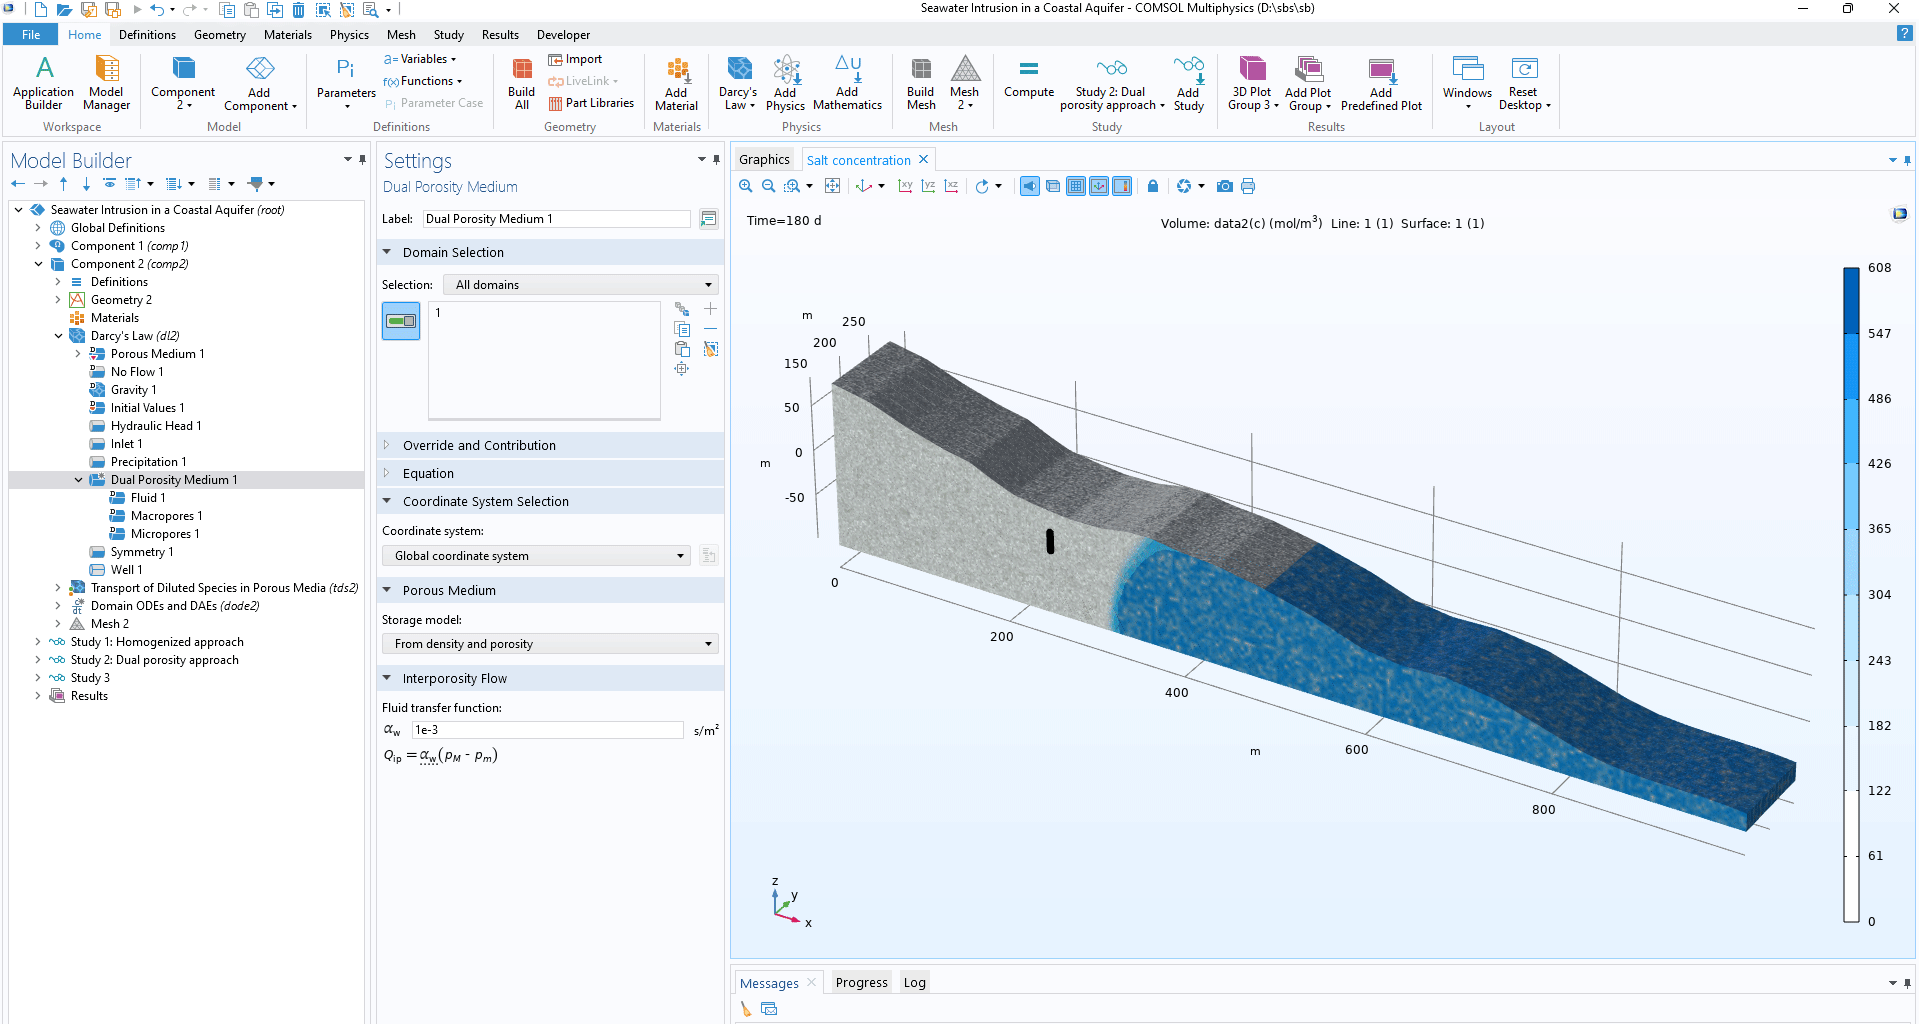 The COMSOL Multiphysics UI showing the Dual Porosity Medium feature highlighted, the corresponding Settings window, and a coastal aquifer model in the Graphics window.